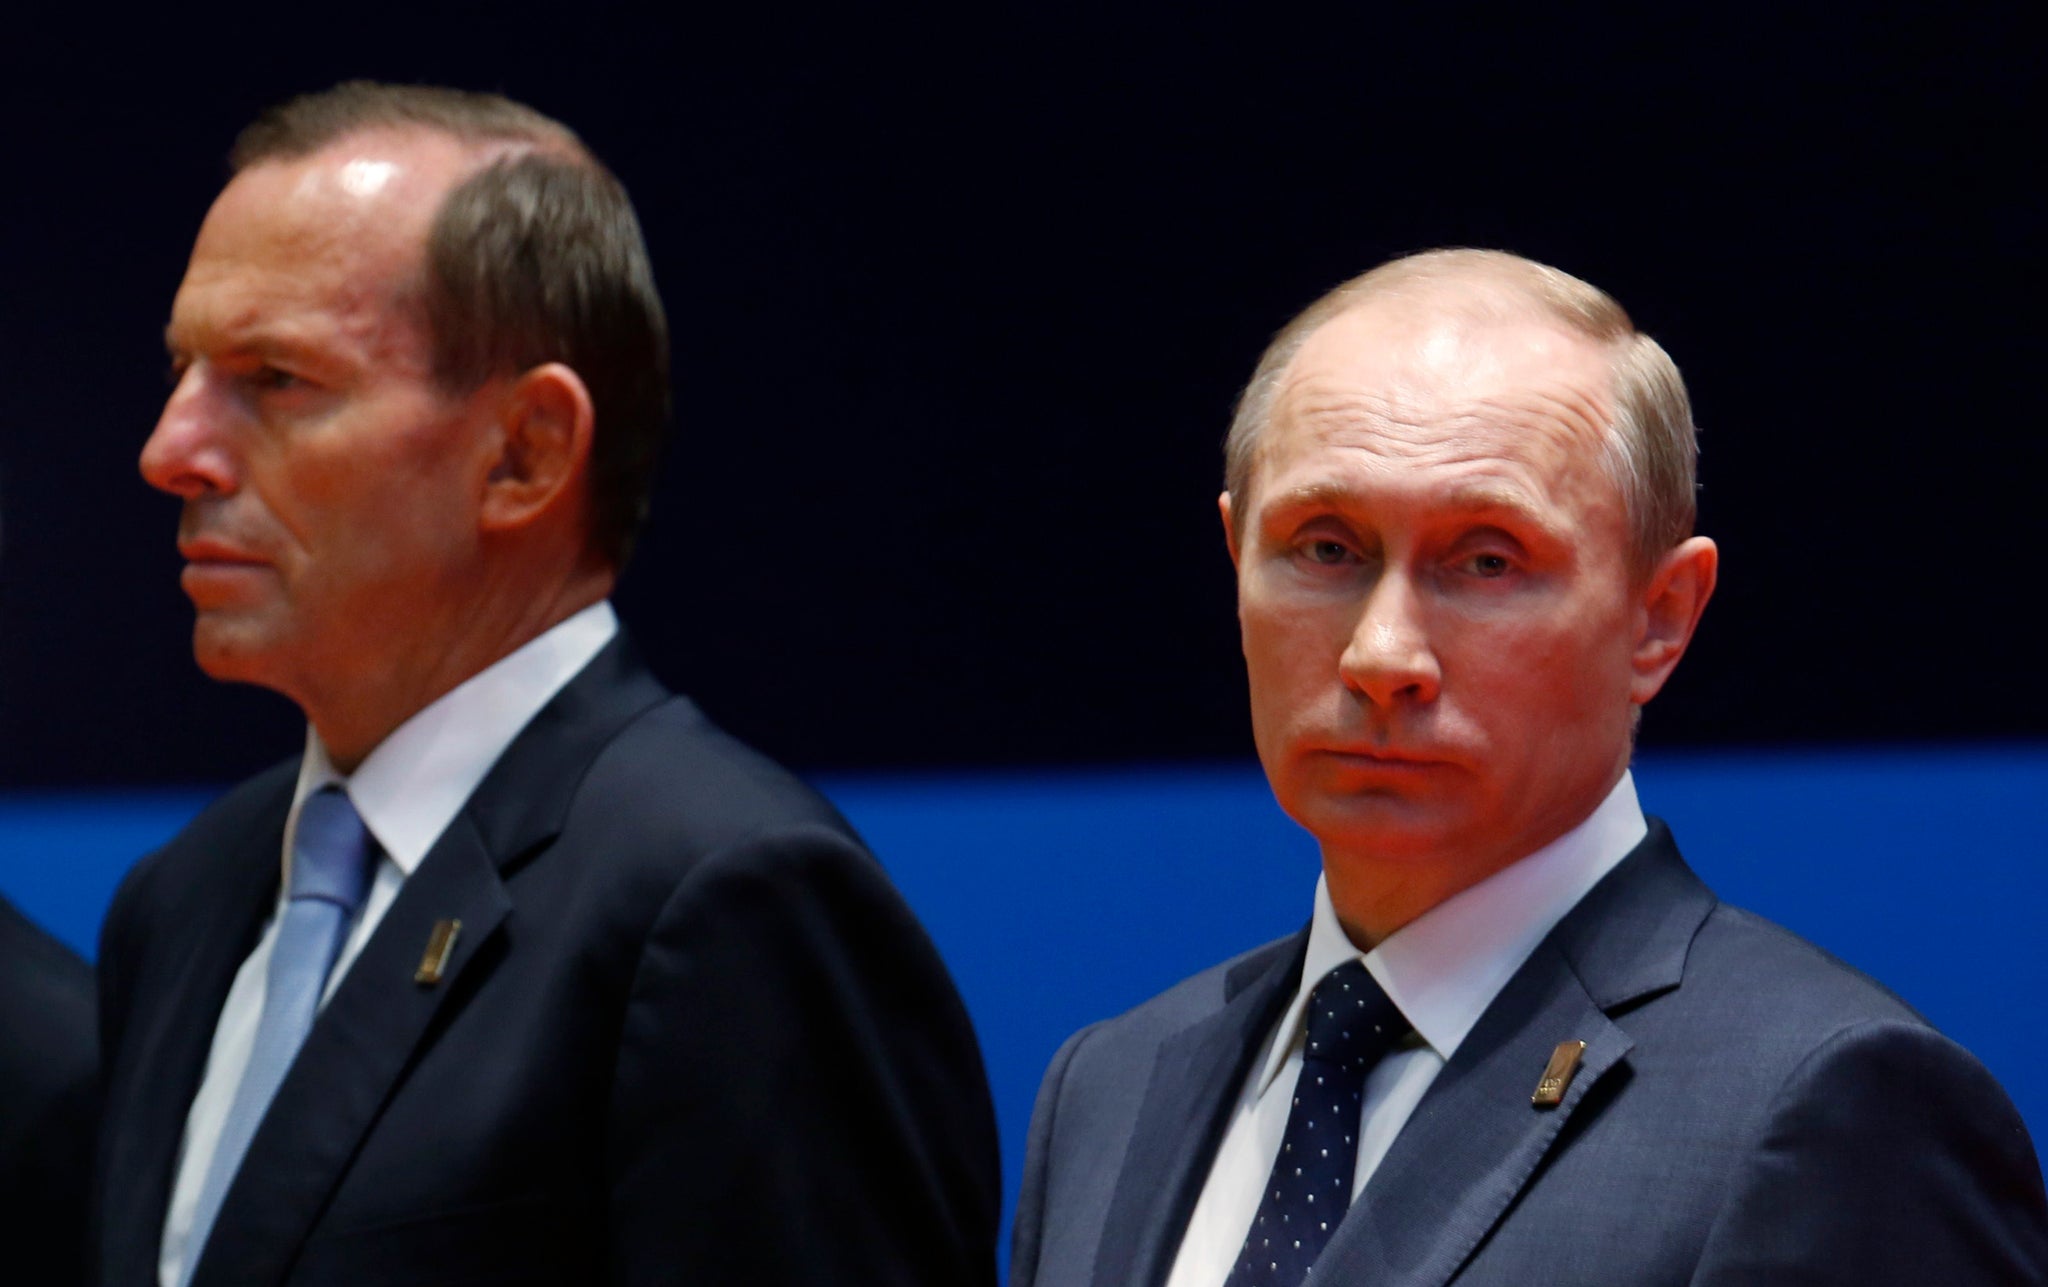 Tony Abbott said that Russia has been a 'bully' as he warned the country against entering Ukraine